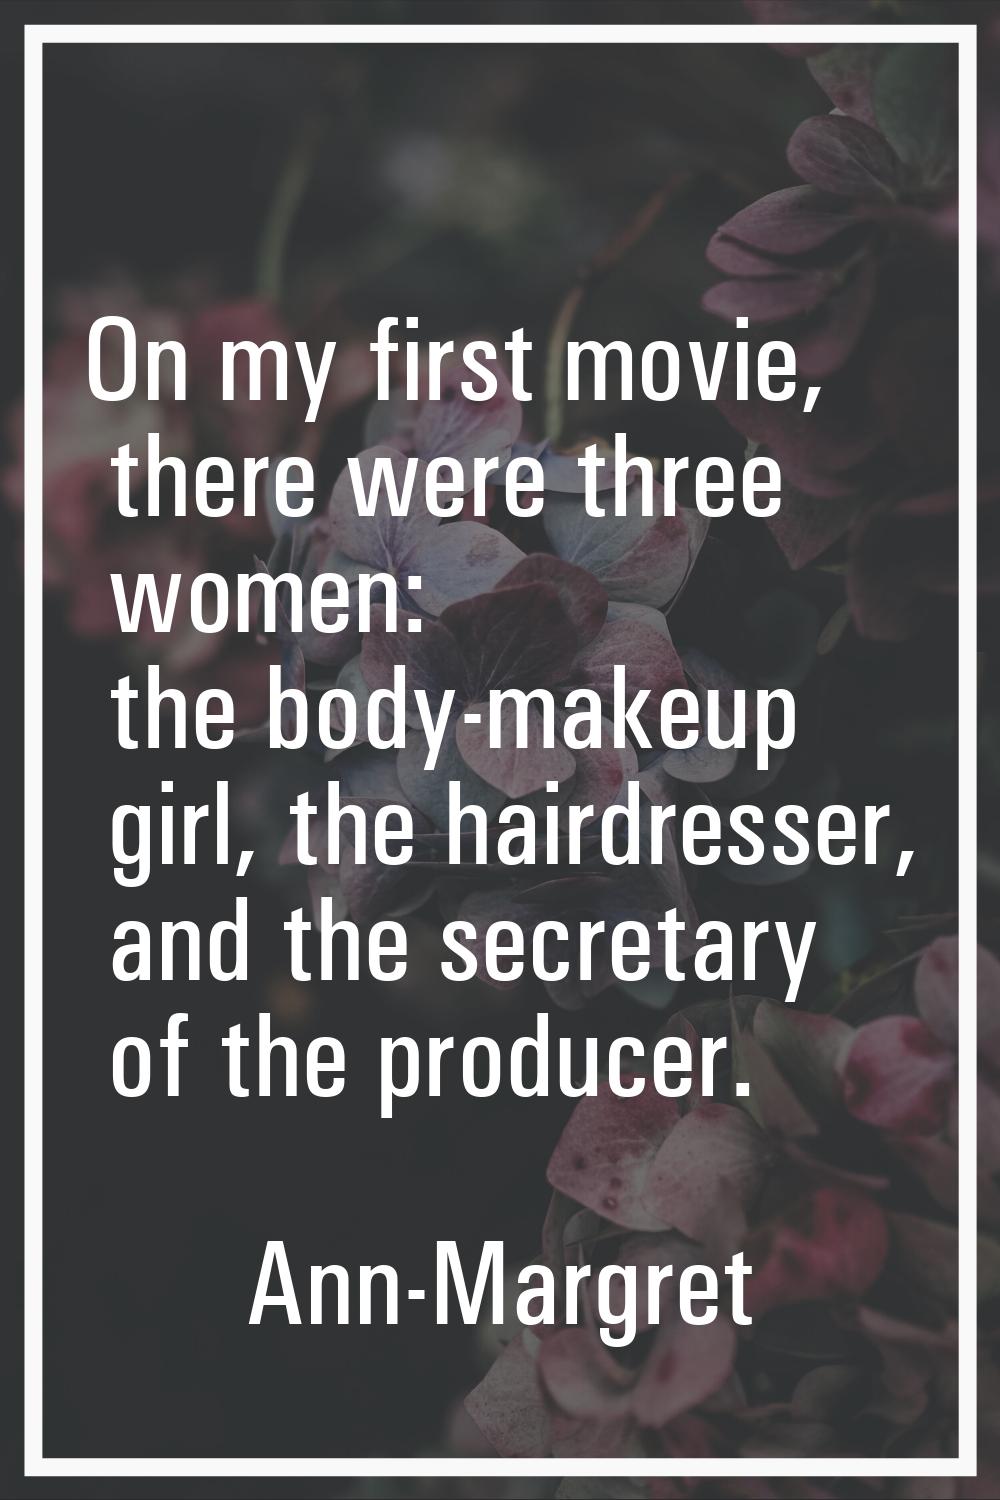 On my first movie, there were three women: the body-makeup girl, the hairdresser, and the secretary